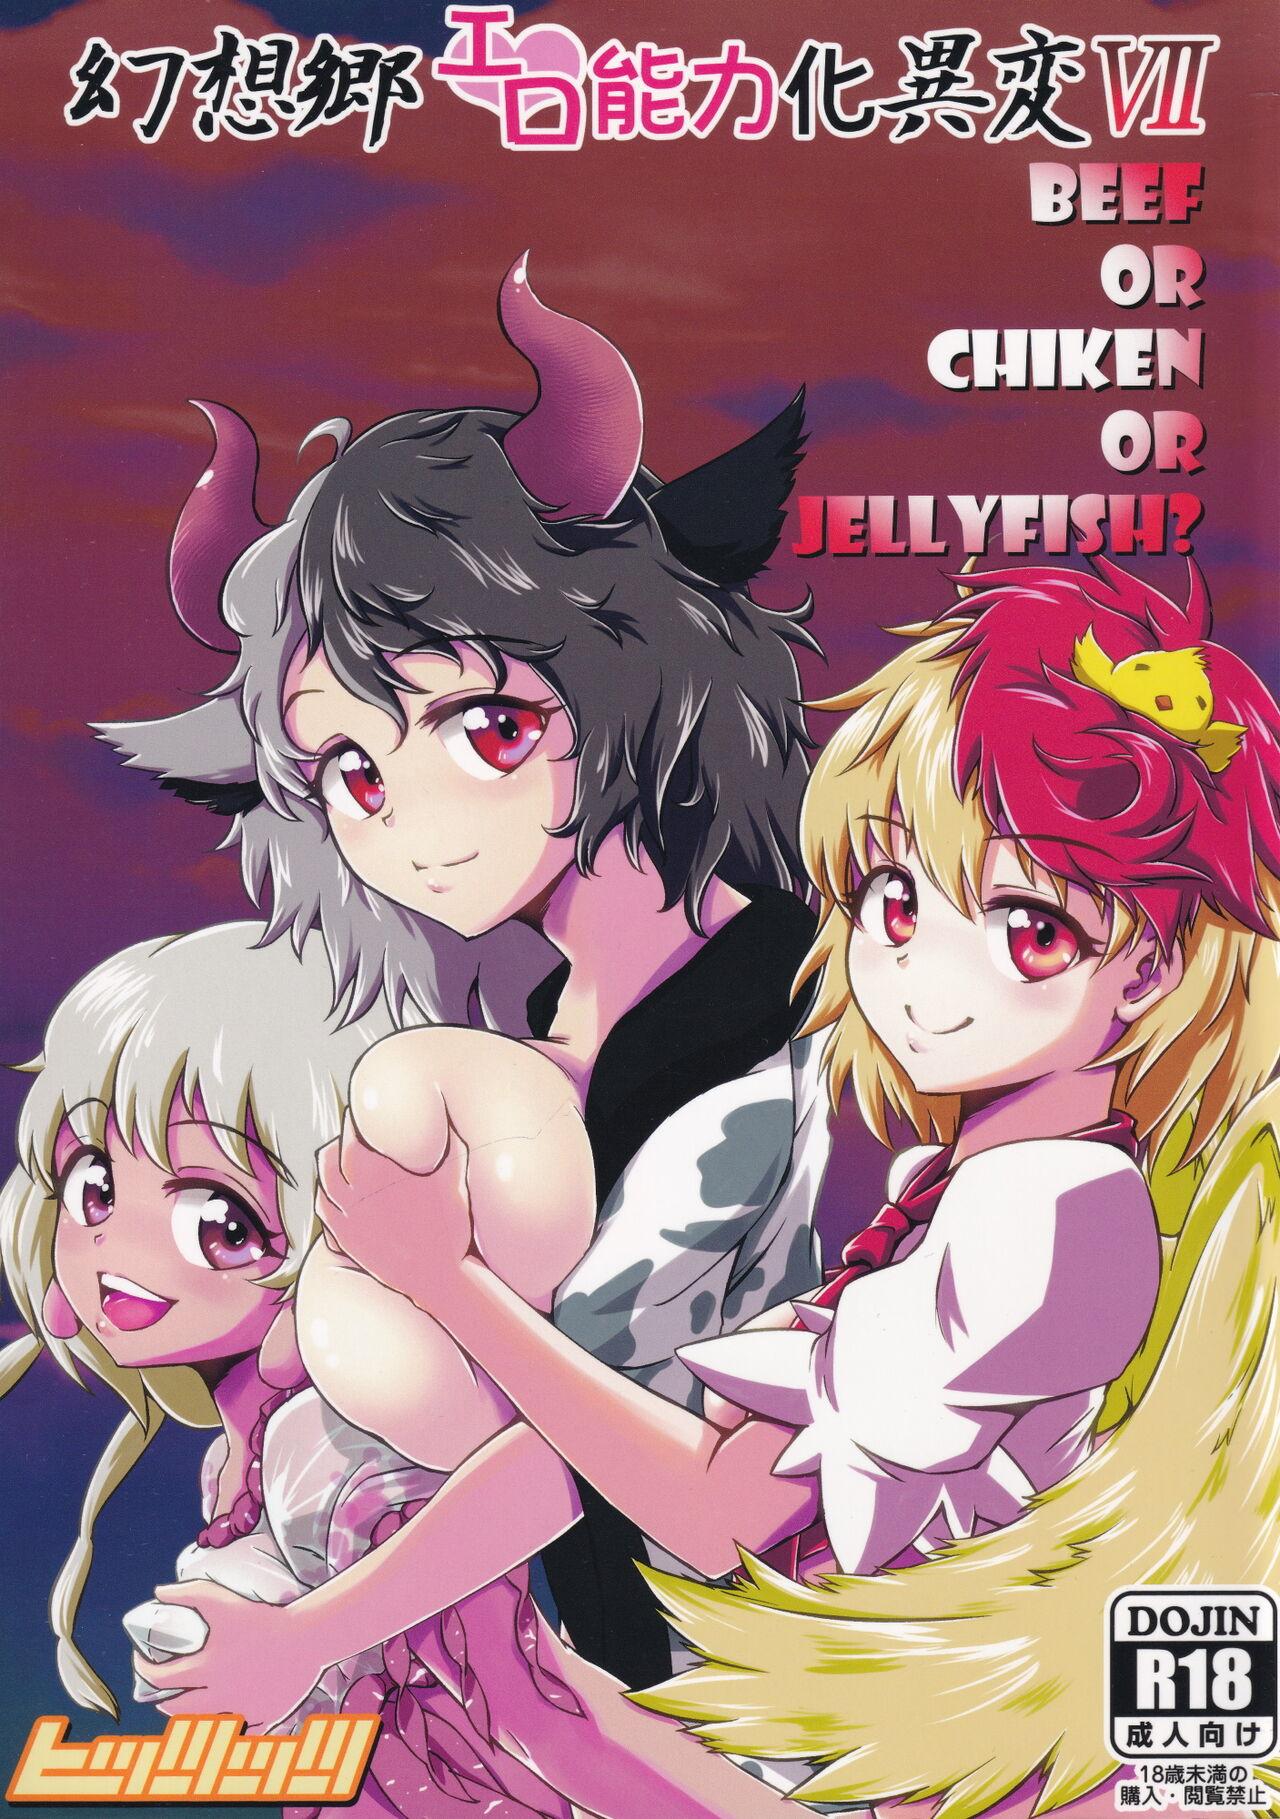 Role Play Gensoukyou Ero Nouryoku-ka Ihen VII Beef or Chicken or Jellyfish? - Touhou project Bound - Picture 1